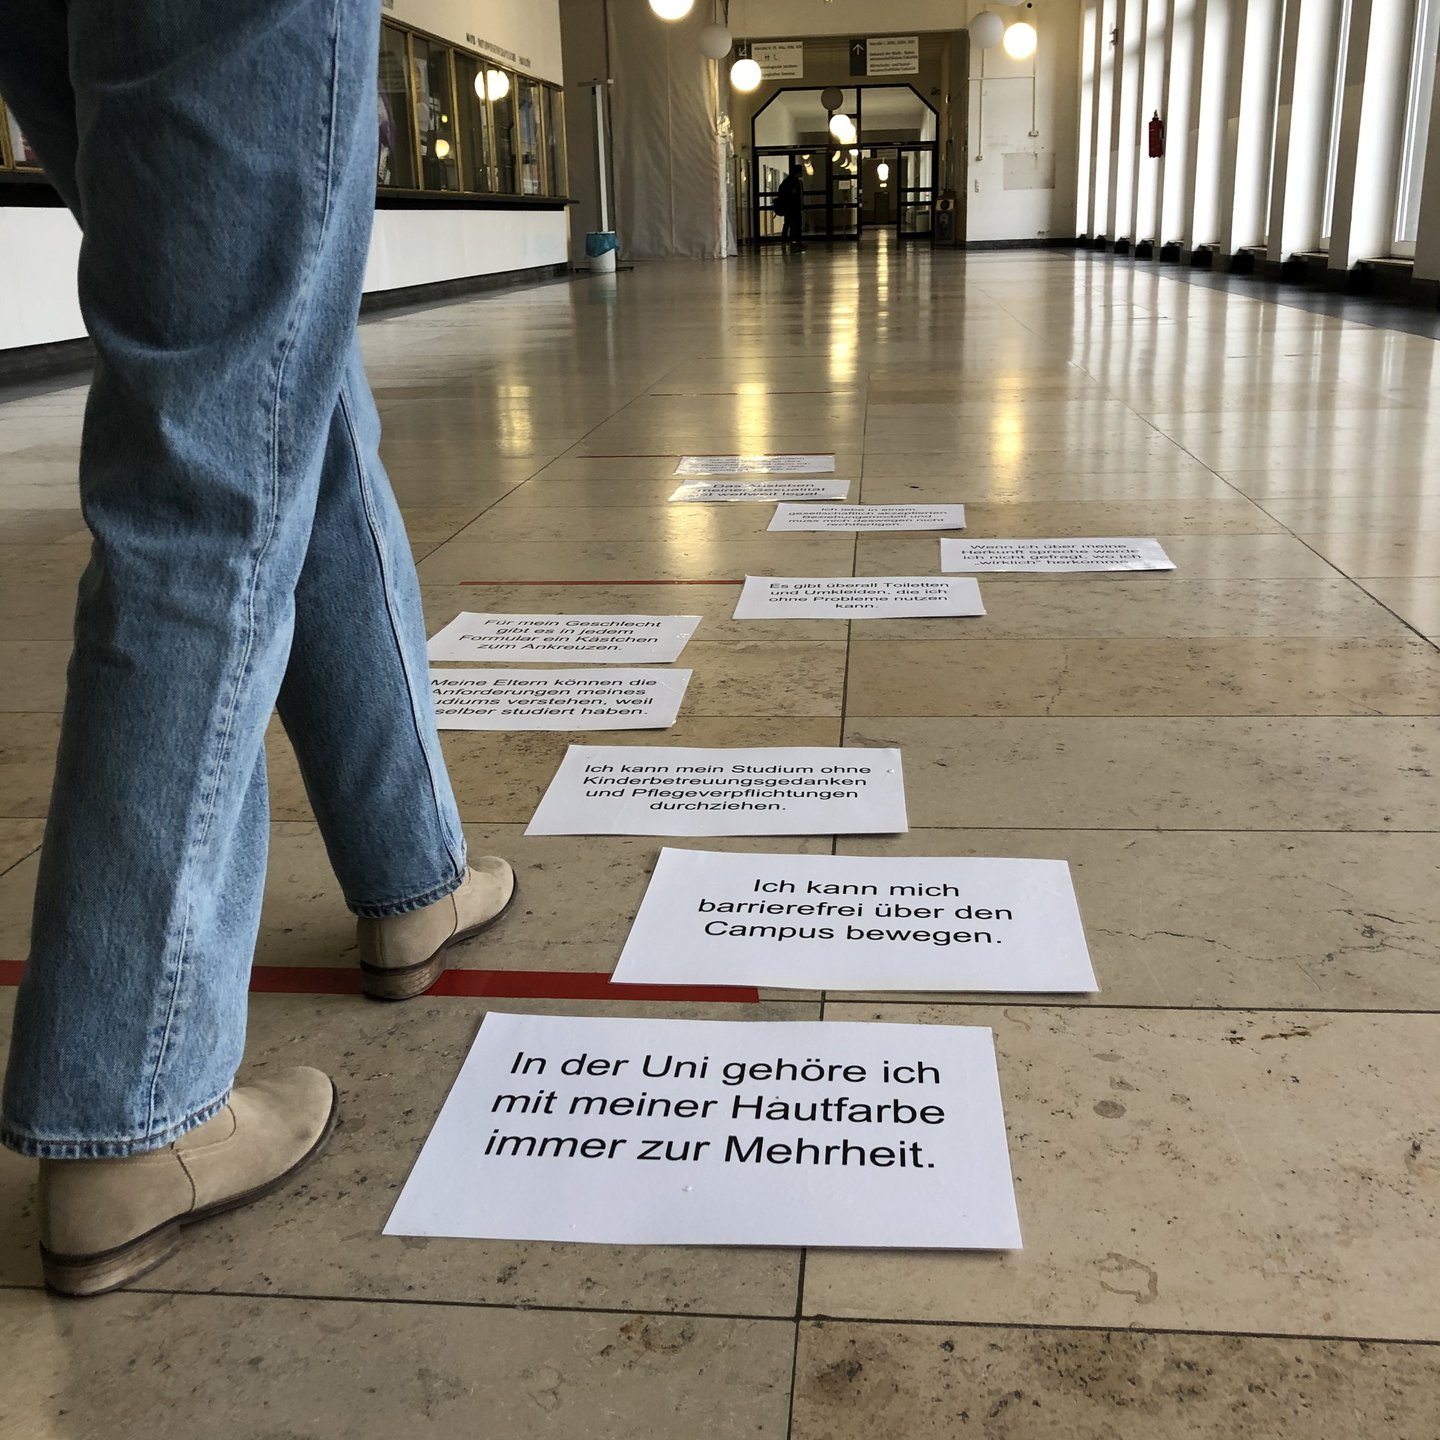 A person walks in the main building of the University of Cologne next to posters that are lying on the floor and form a path. The first three cards each say "at the university I belong to the majority with my skin color", "I can move around the campus without barriers" and "I can complete my studies without having to worry about childcare or care obligations". The other seven cards also contain text that is less legible. A person walks through the building in the background.